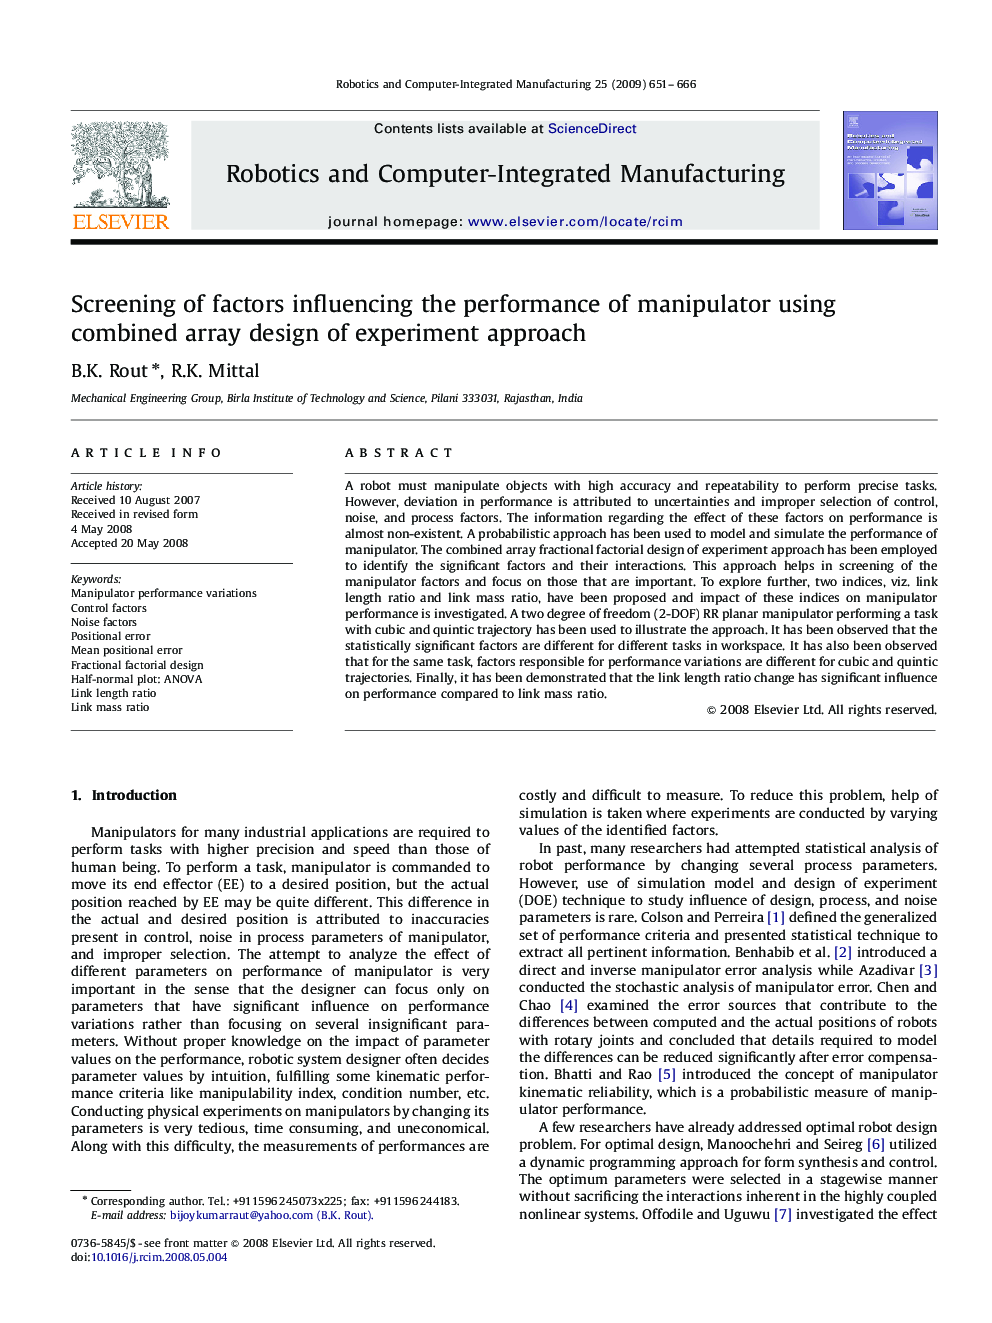 Screening of factors influencing the performance of manipulator using combined array design of experiment approach